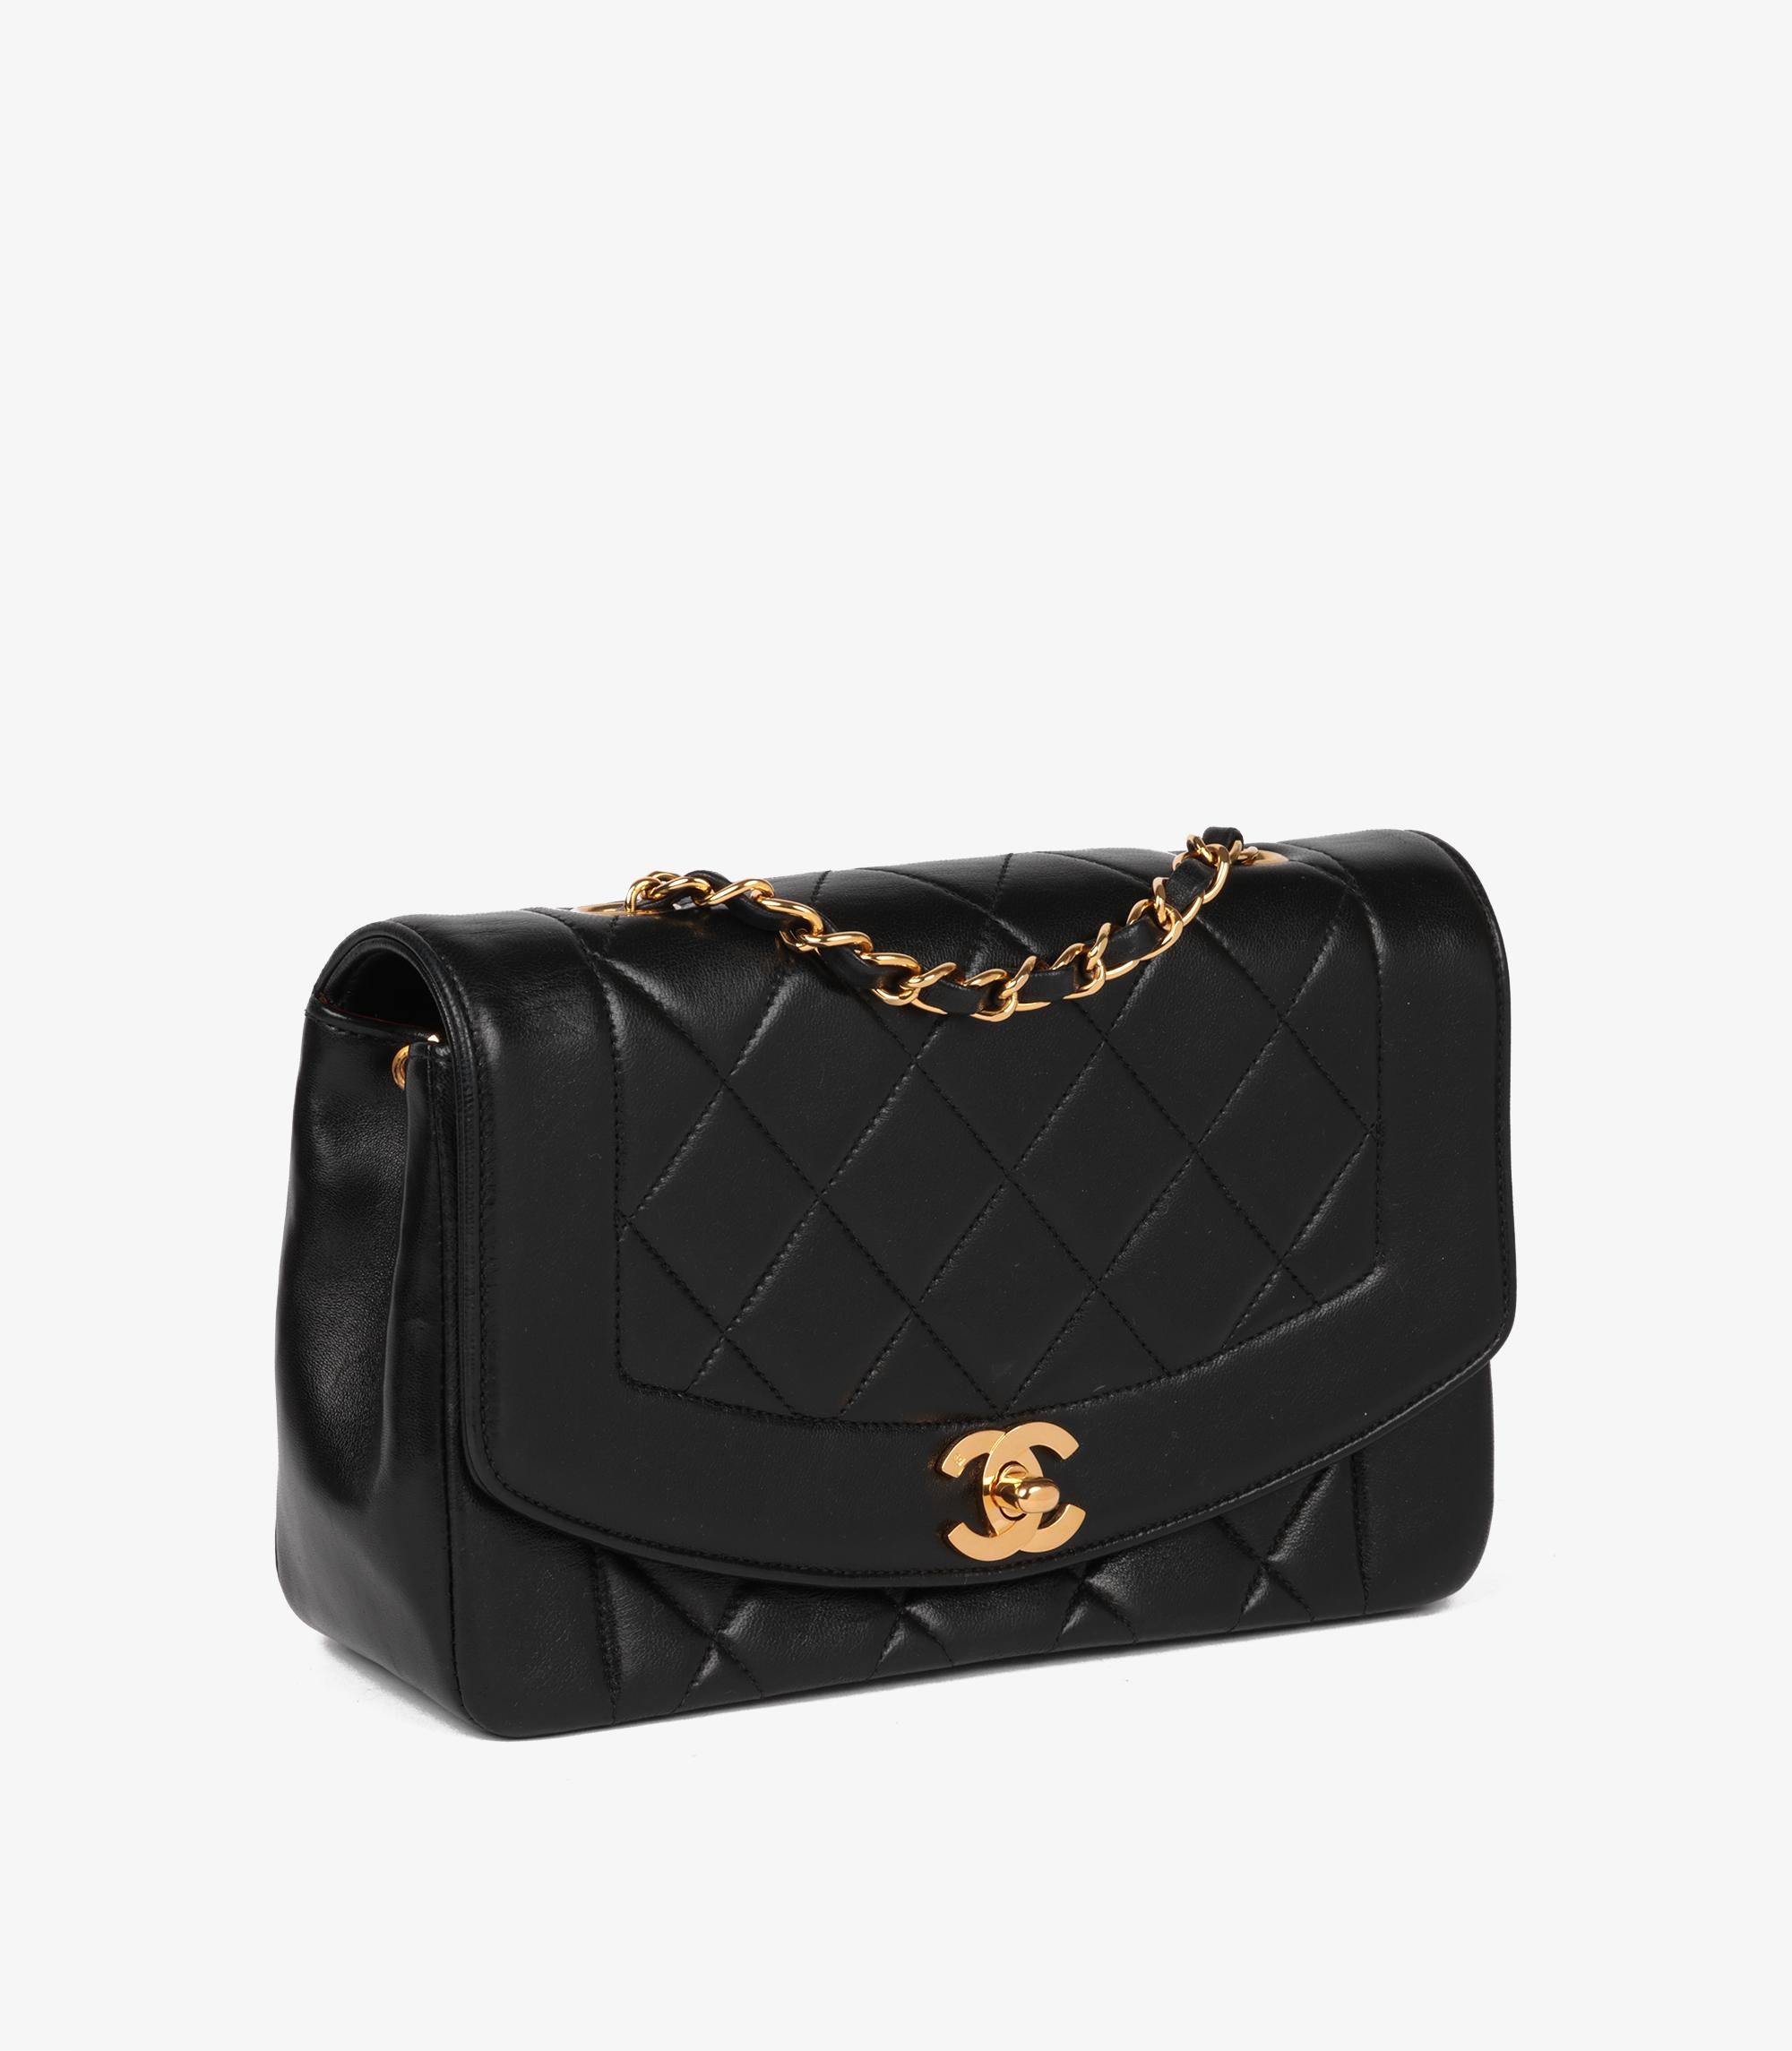 Chanel Black Quilted Lambskin Vintage Small Diana Classic Single Flap Bag In Excellent Condition For Sale In Bishop's Stortford, Hertfordshire